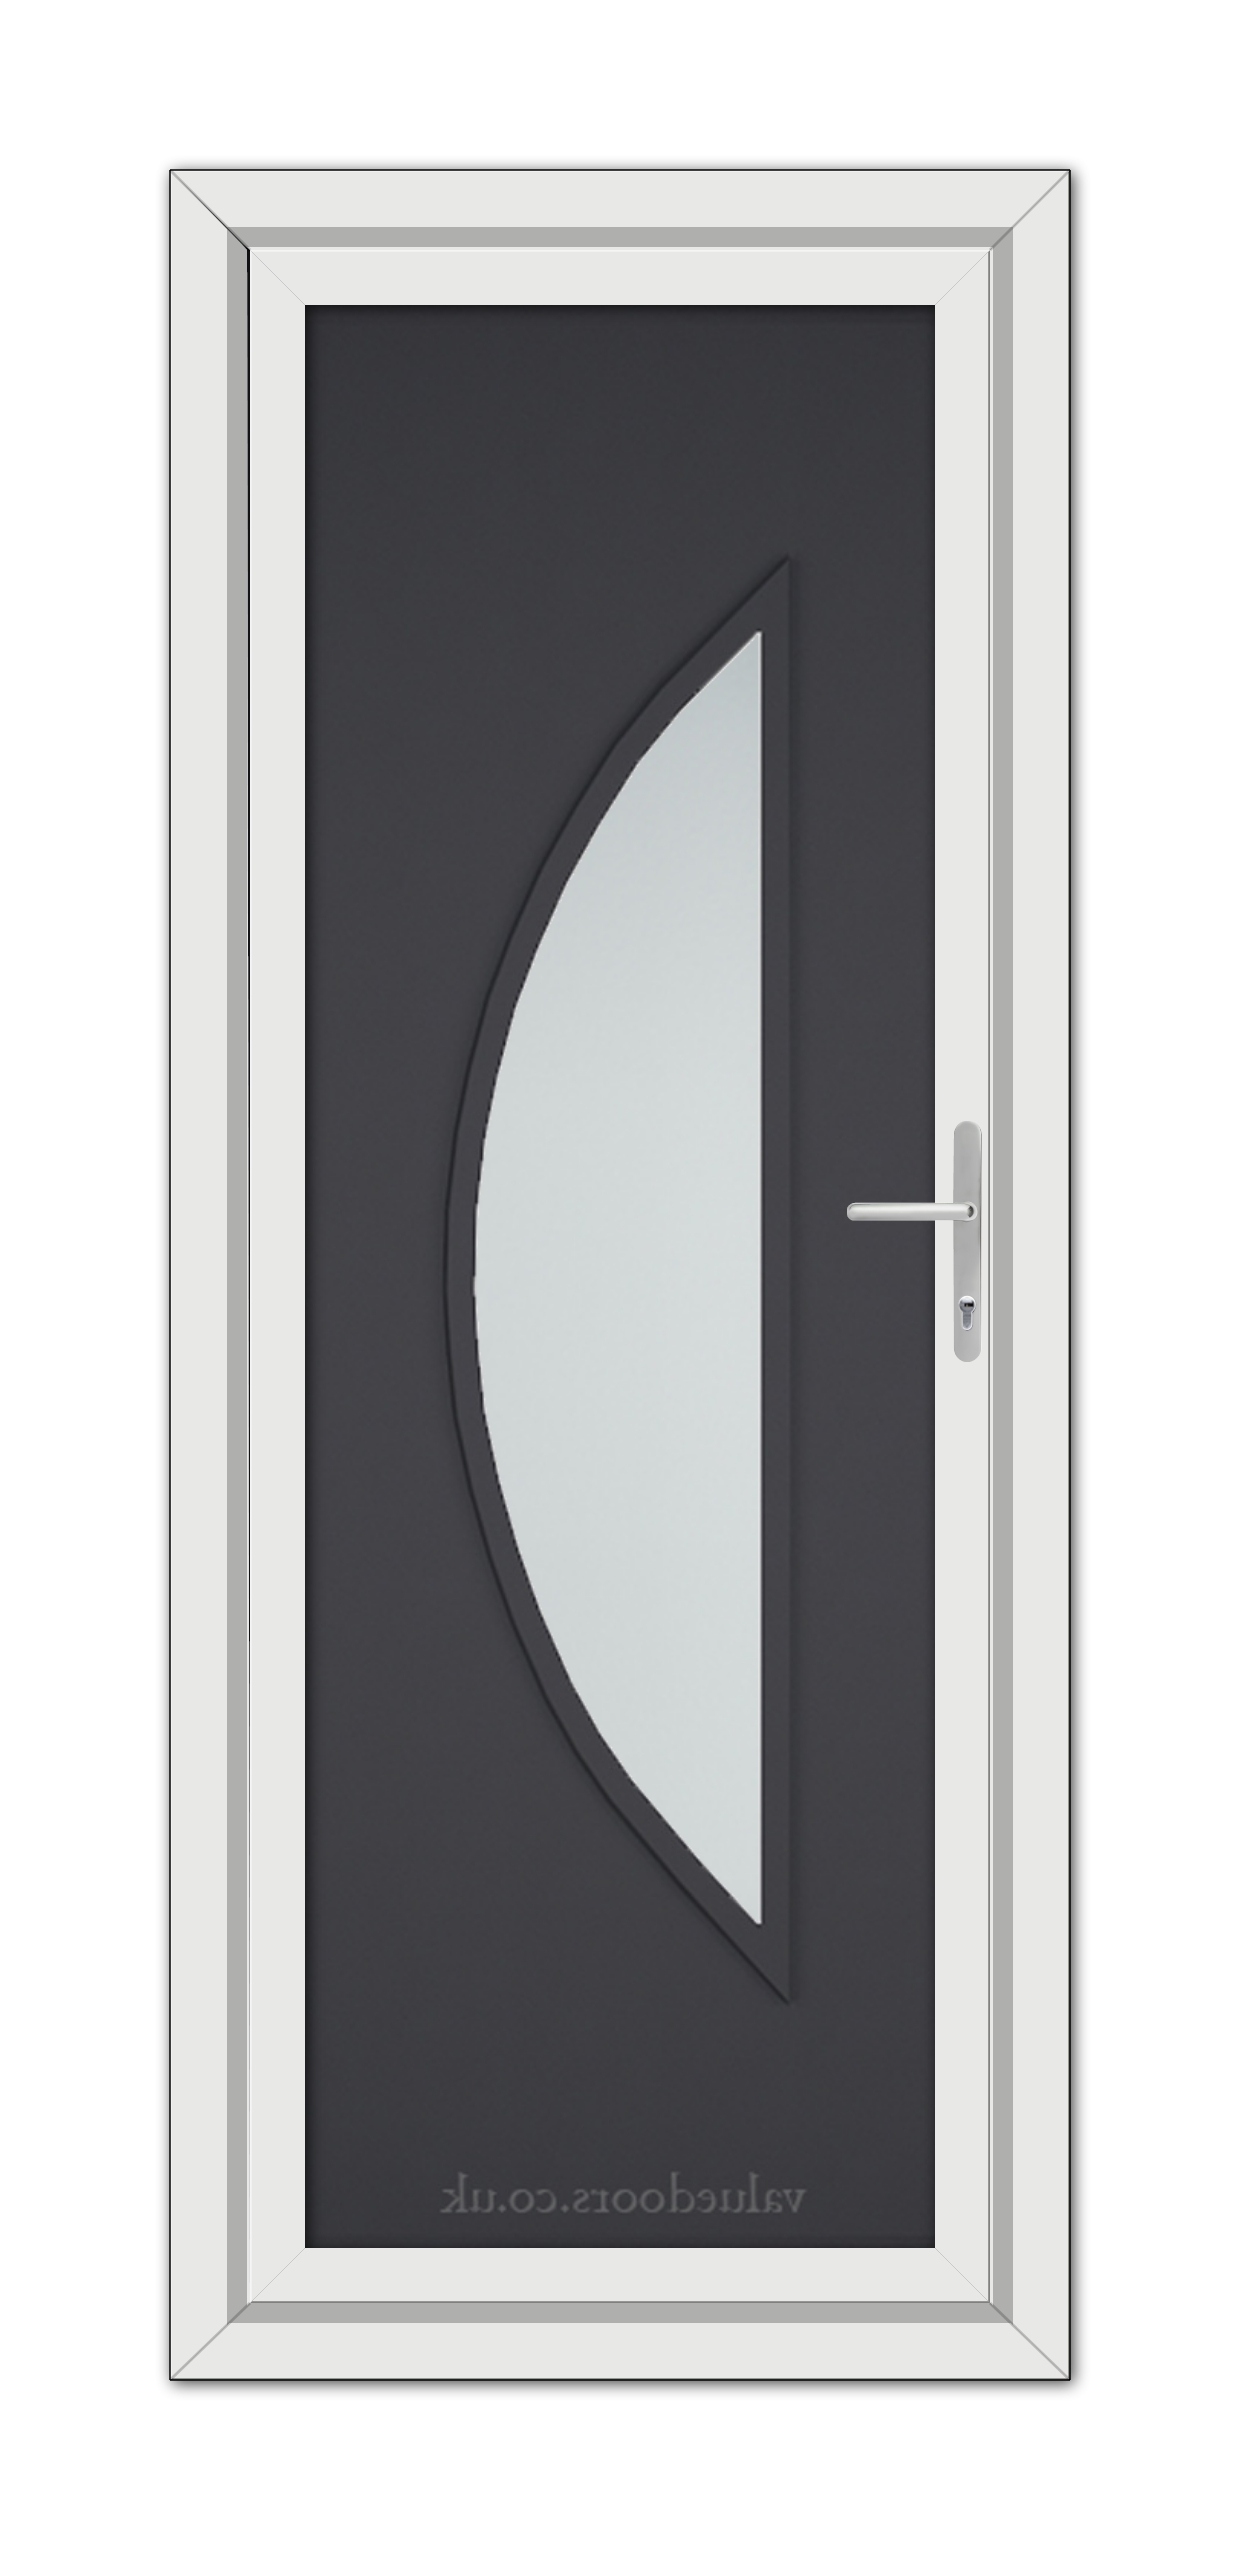 Grey Modern 5051 uPVC door design featuring a tall, narrow white frame with a central black panel and an elongated, half-moon frosted glass window on the right side, complemented by a sleek door handle.